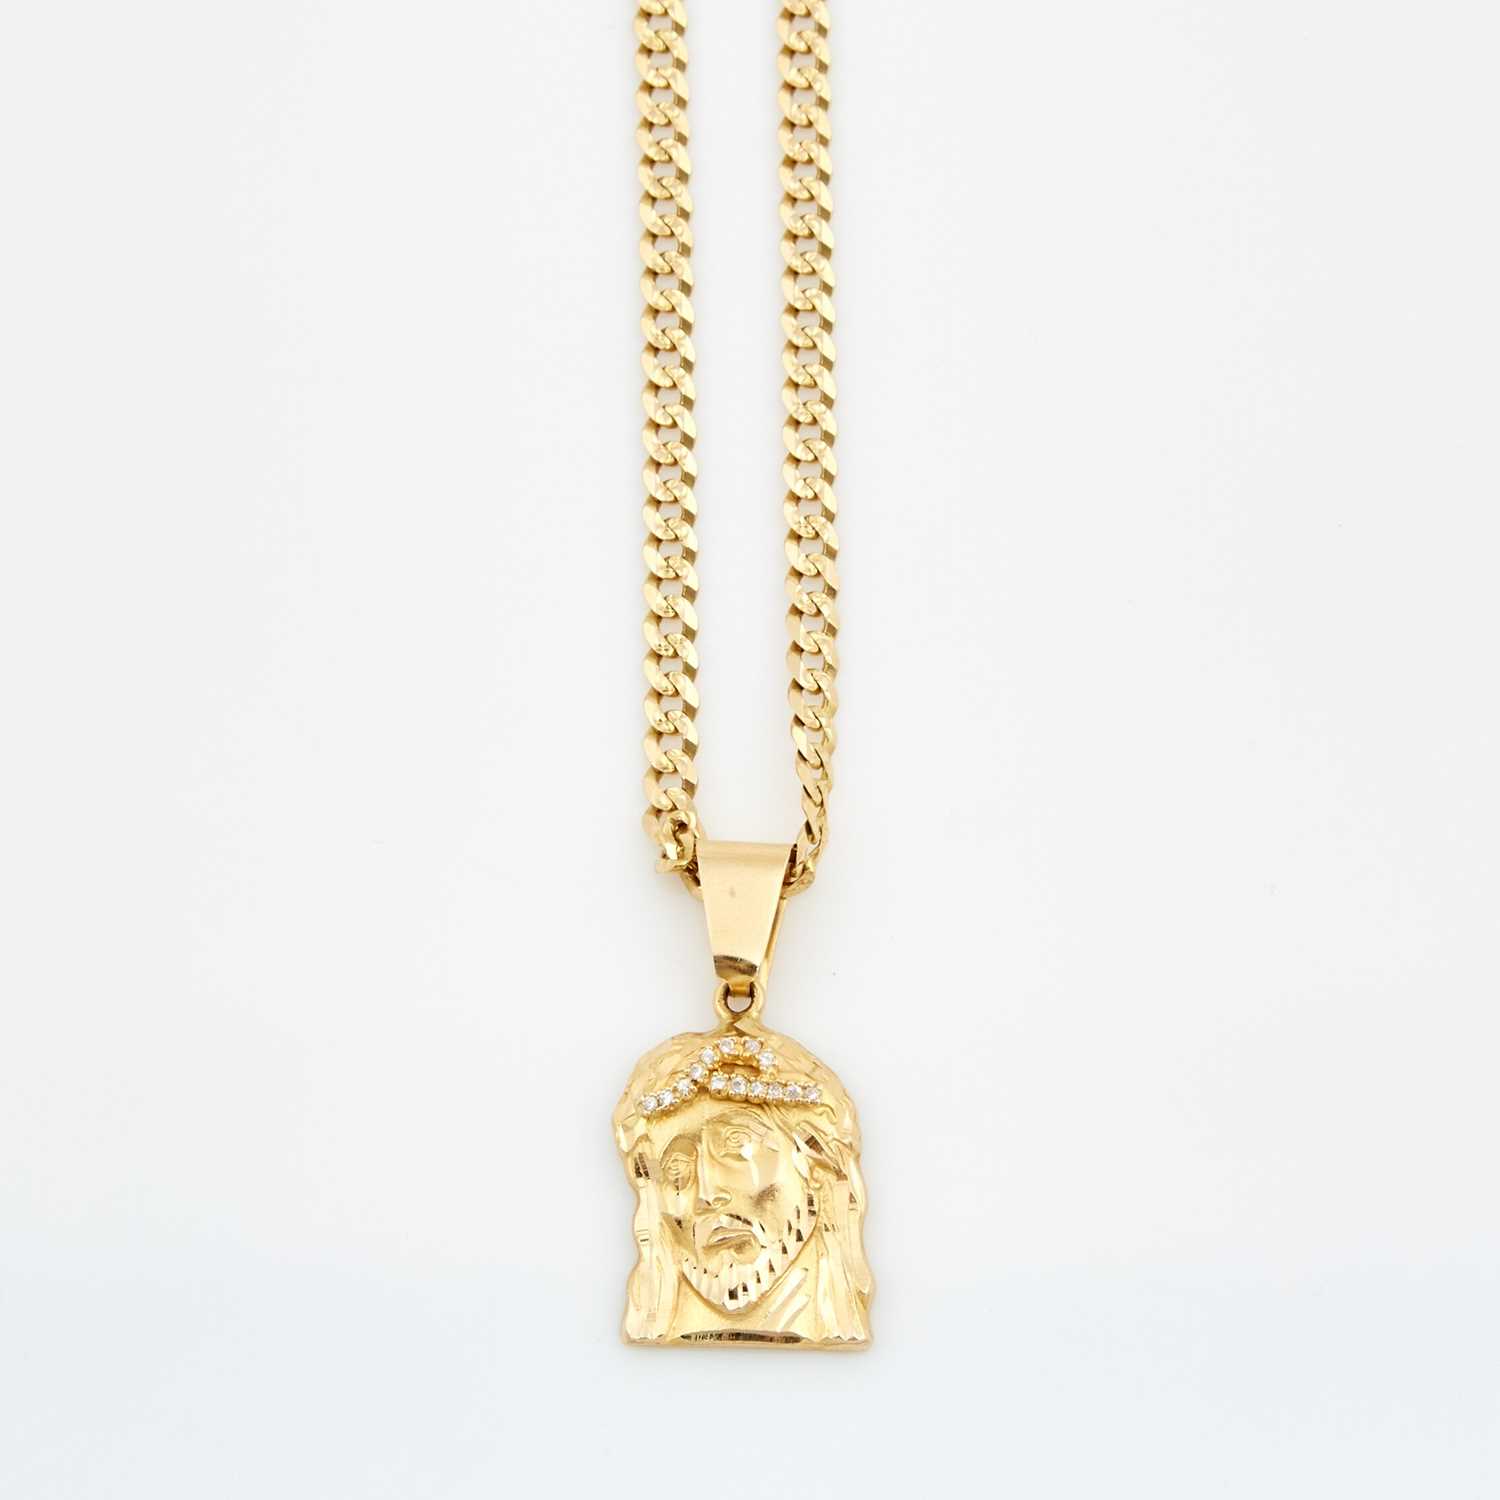 Lot 192 - Gold and Stone Pendant and Neck Chain, 14K 15 dwt. all